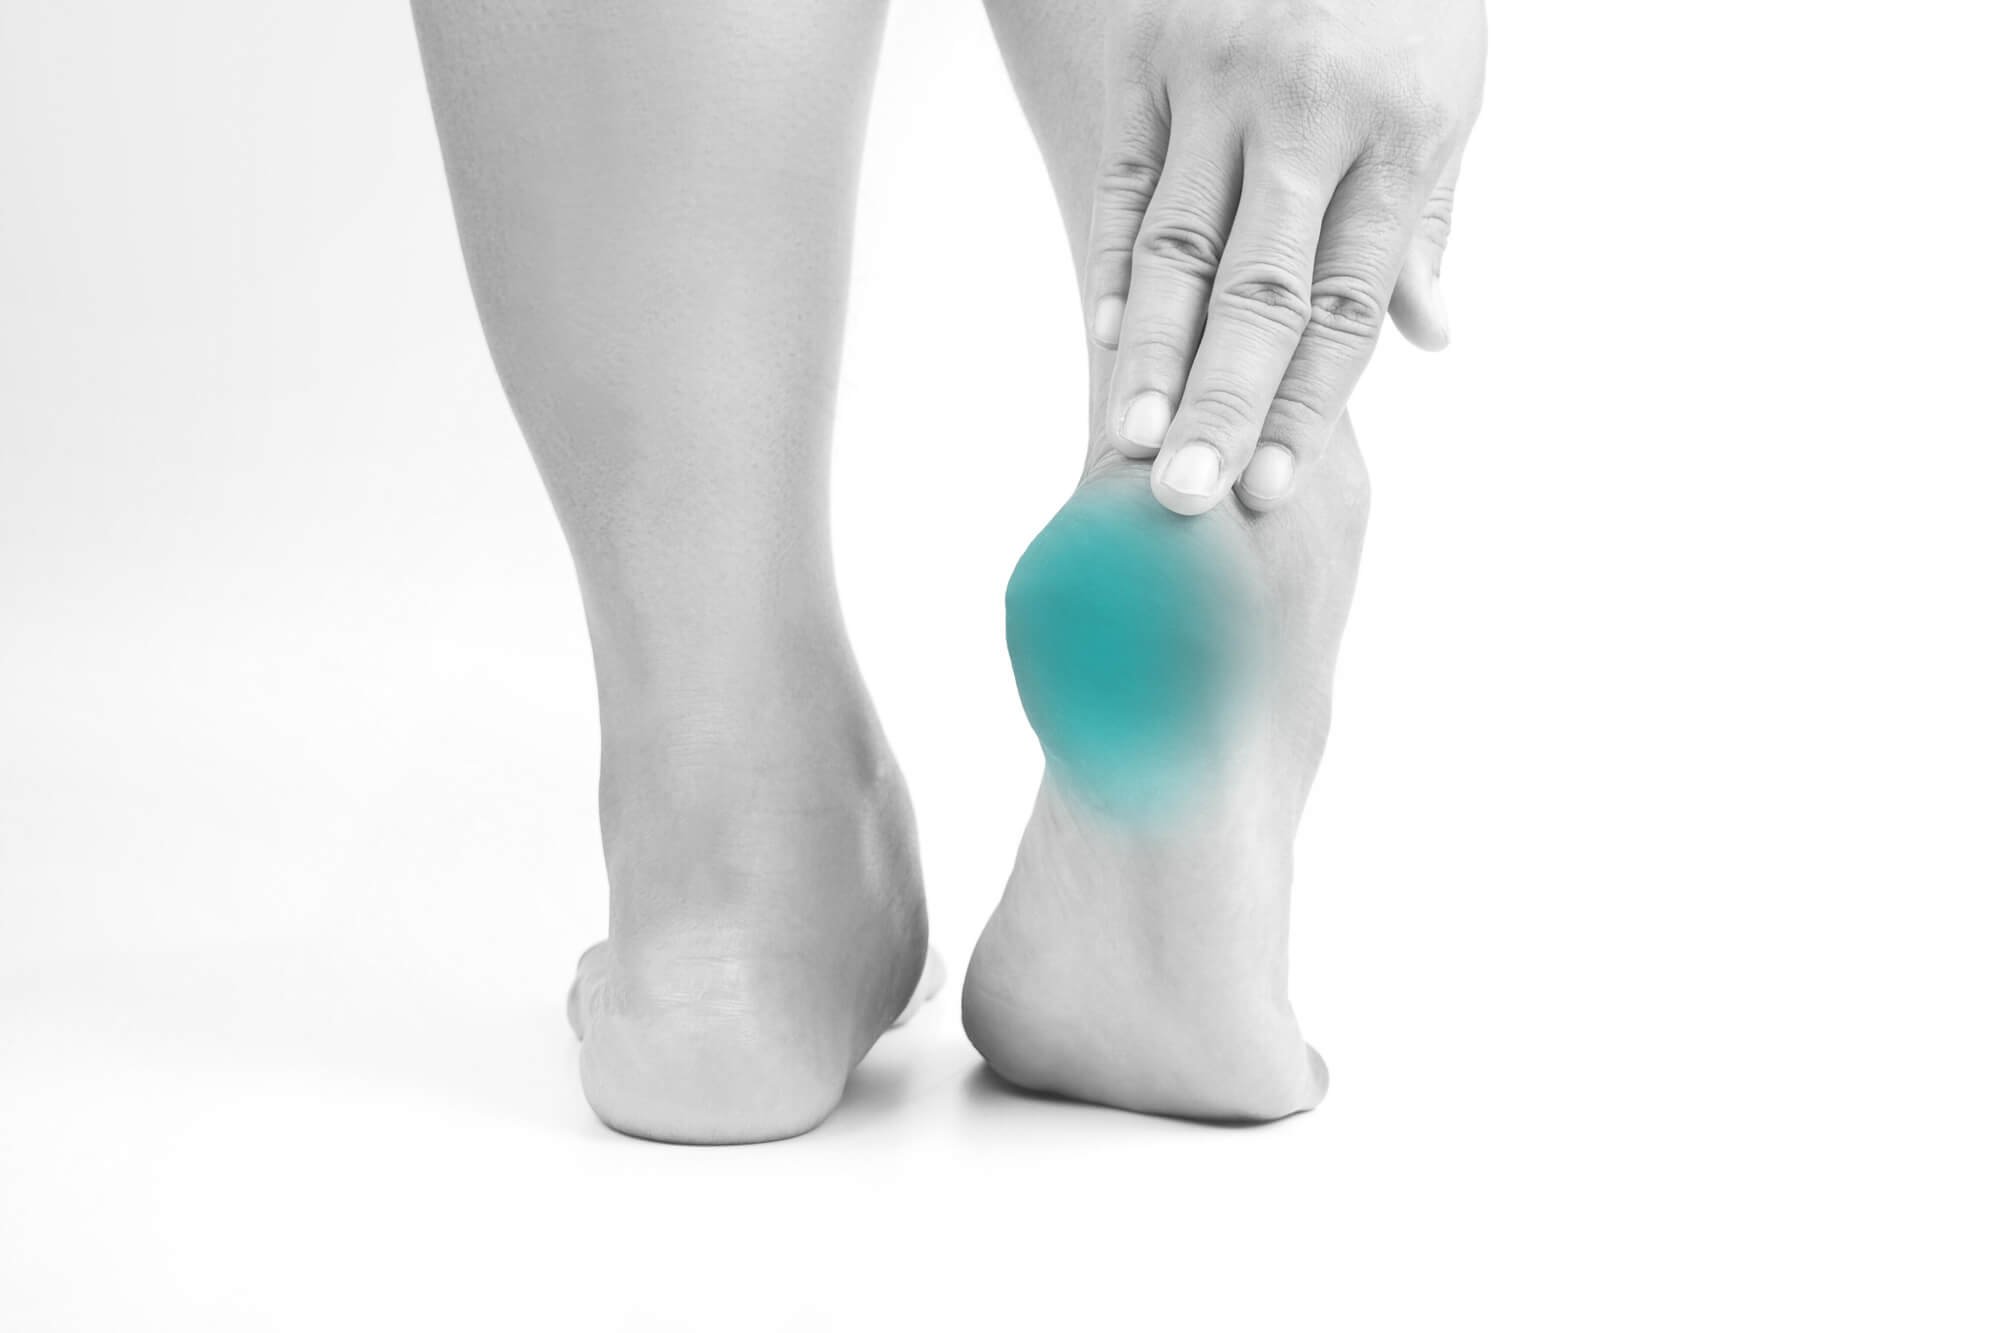 Leg, Knee, Ankle & Foot Pain | The Back Clinic